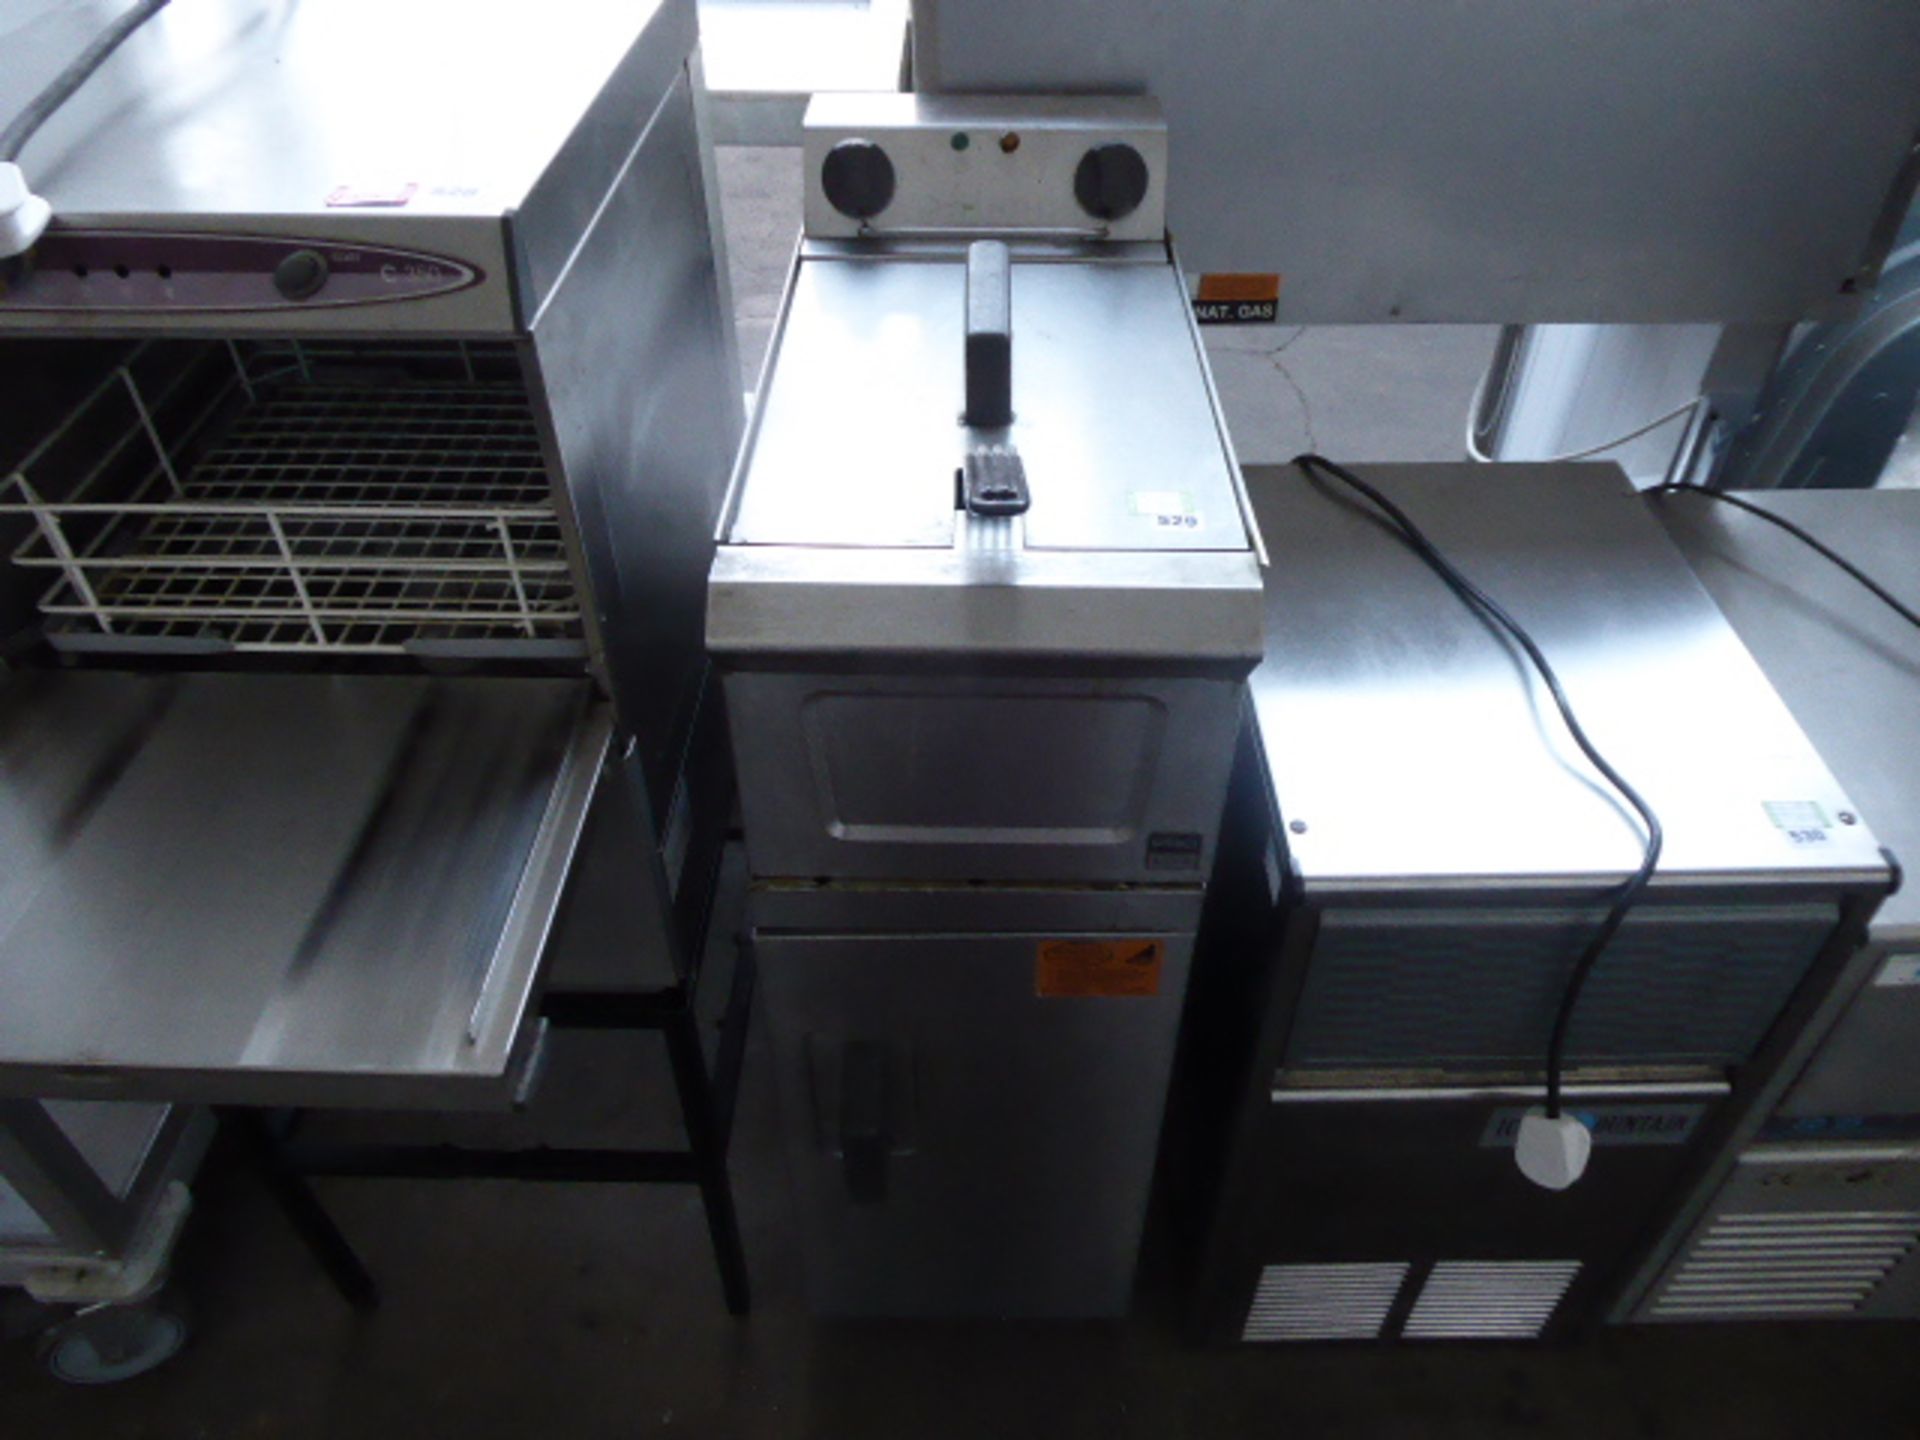 (TN92) 30cm electric Falcon single well fryer on stand